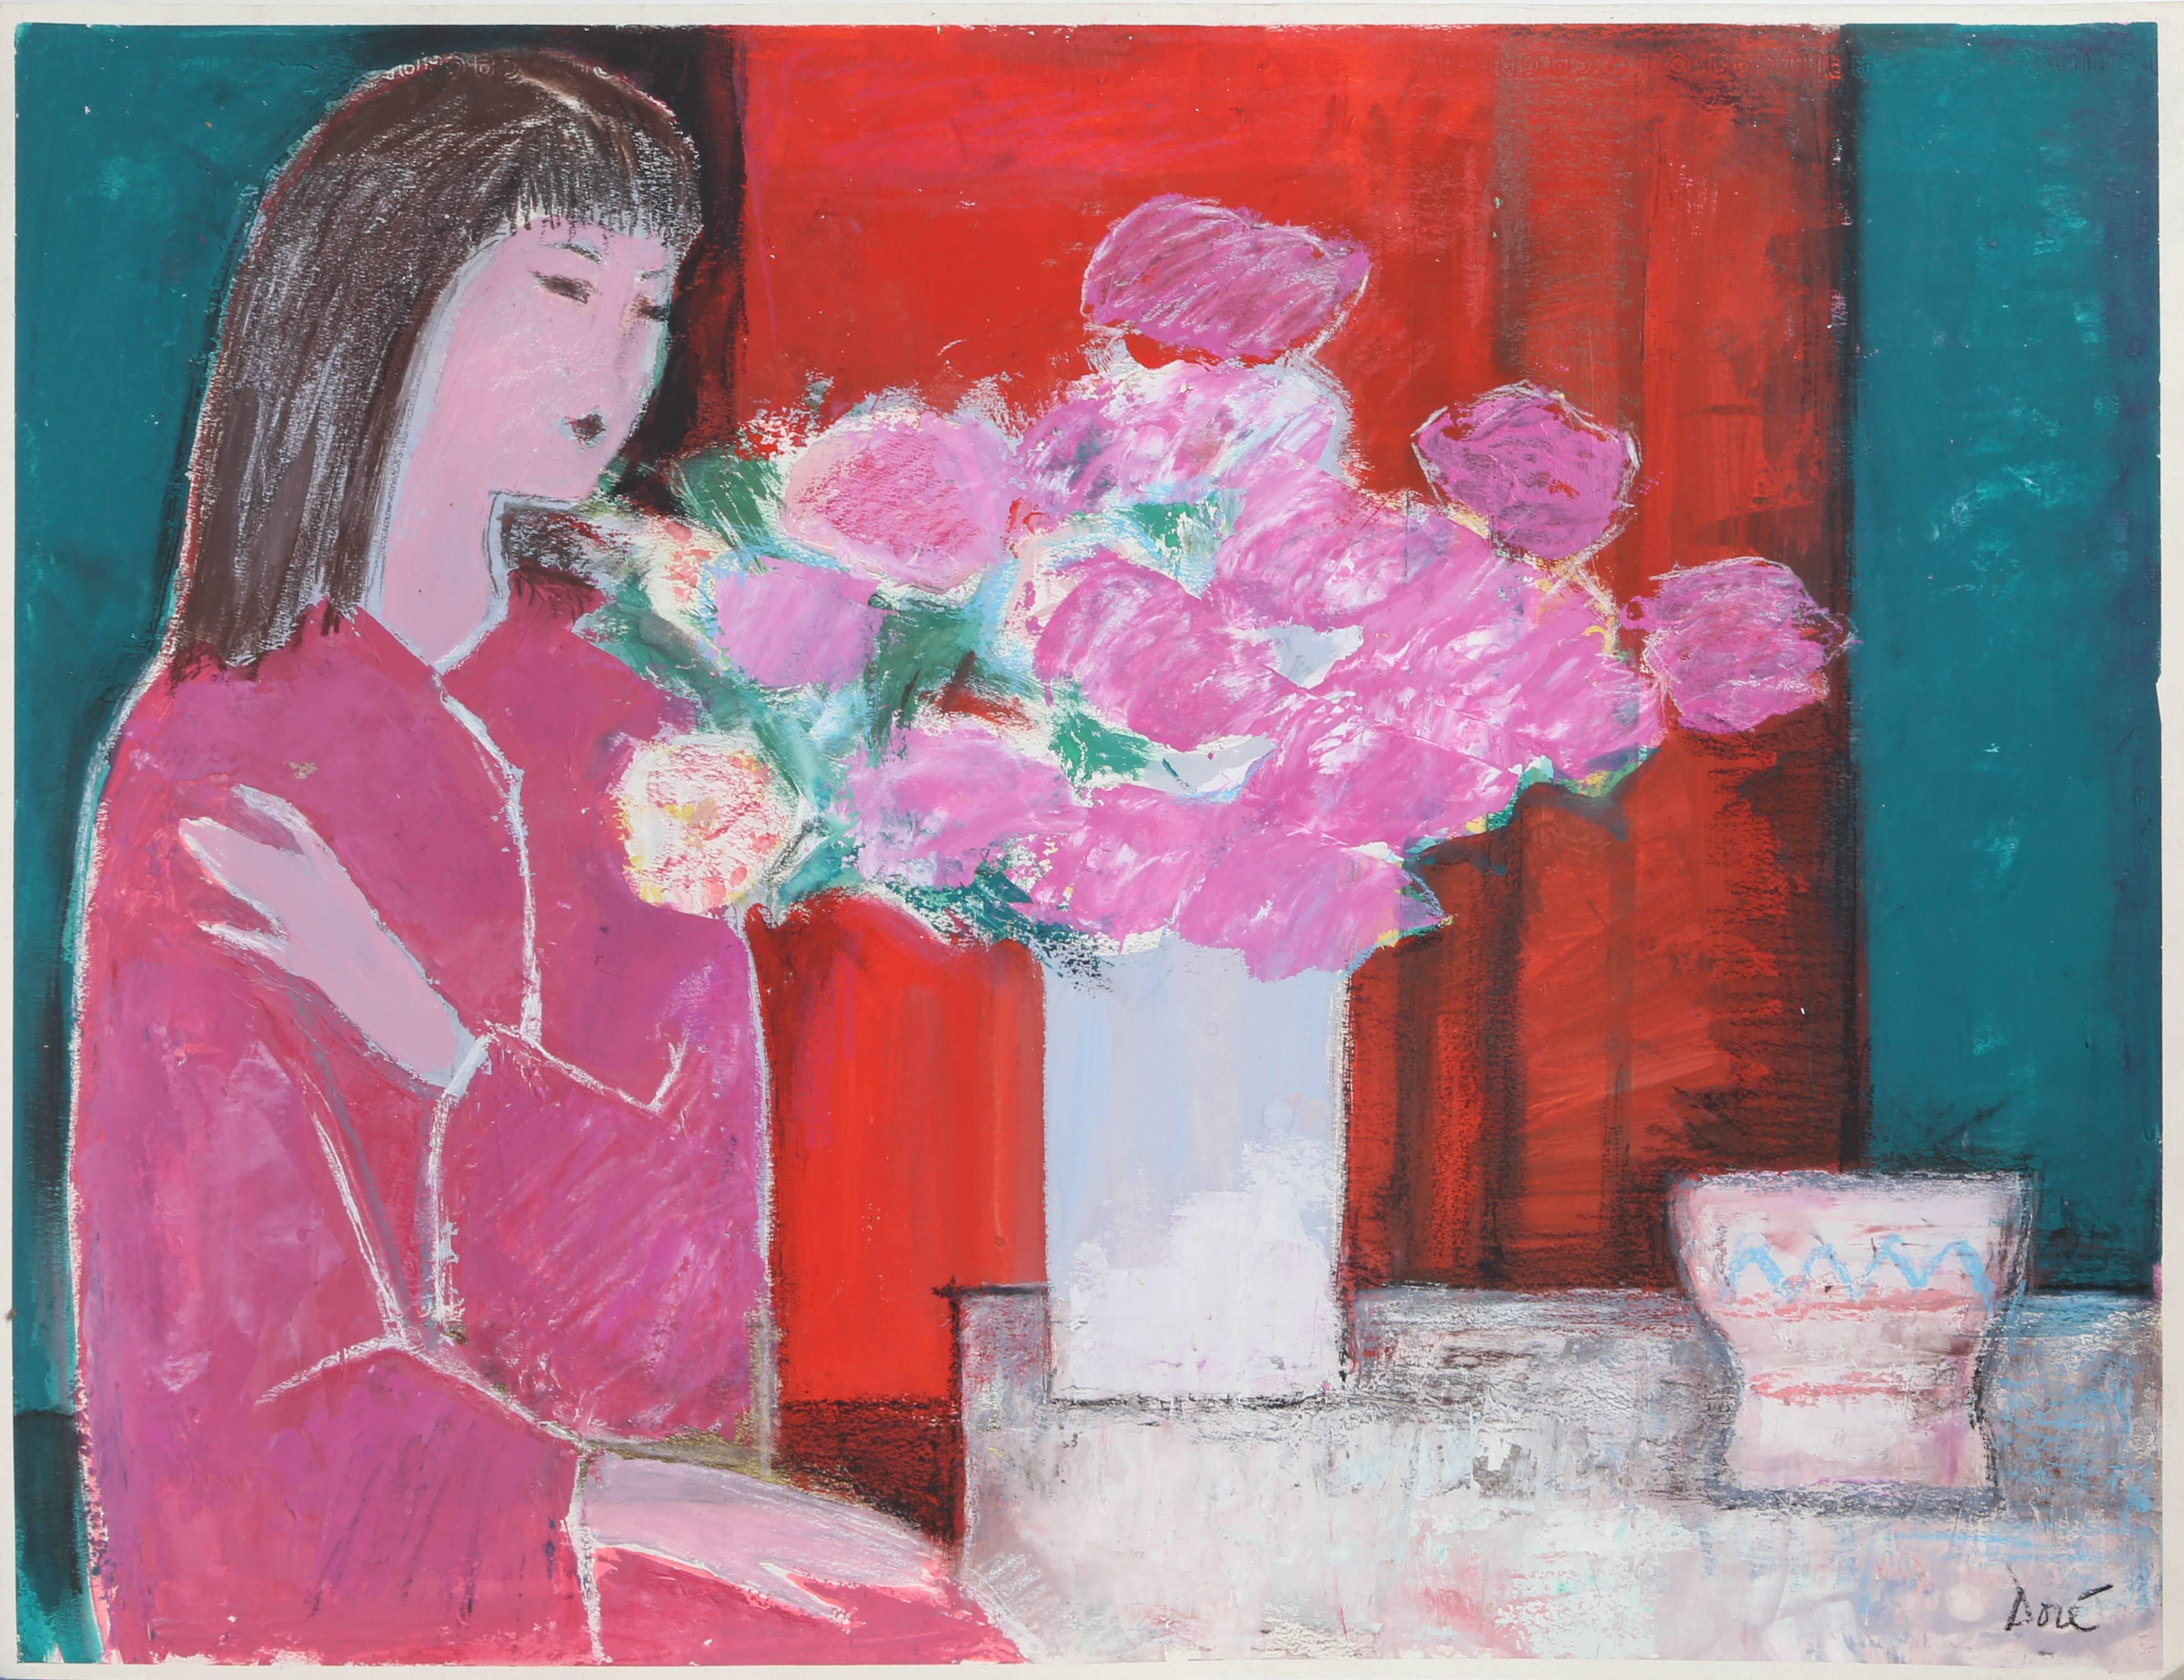 Jose Canes (Dore) Figurative Painting - "Woman in Pink with Flowers, " Acrylic and Pastel on Paper, circa 1980